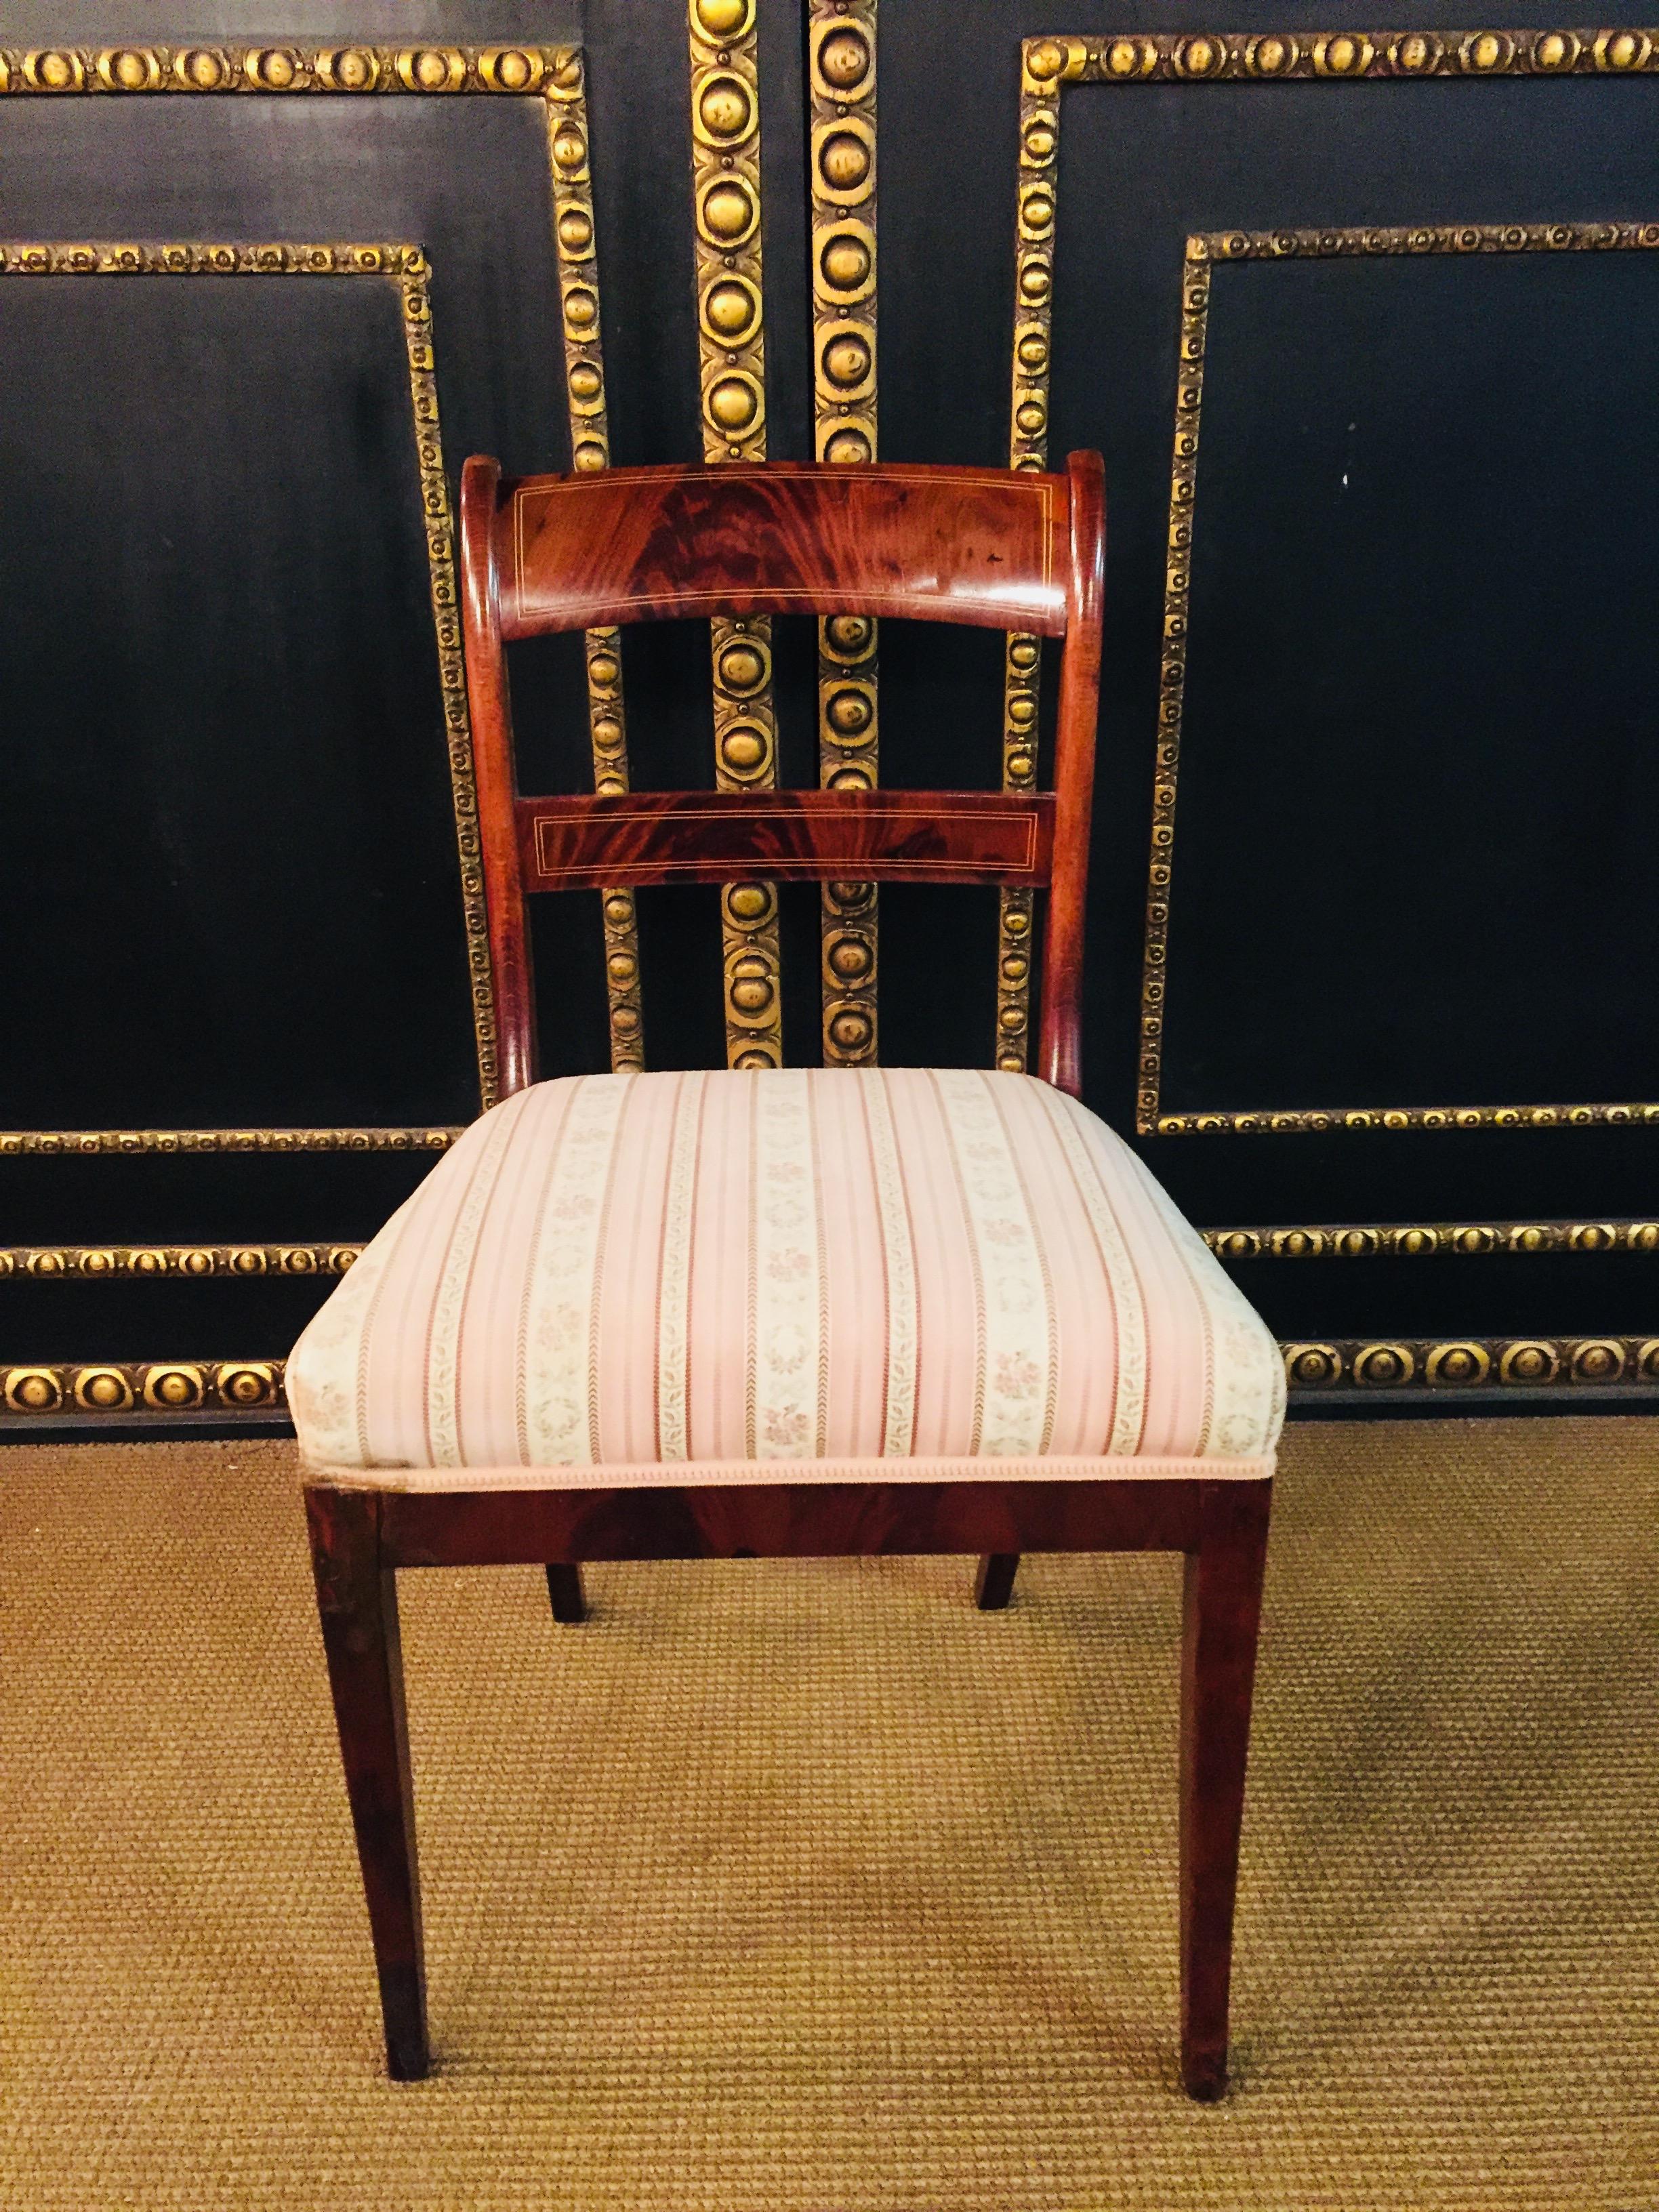 Mahogany. Trapezoidal frame on slightly flared legs. Slightly curved backrest with straight top and middle bridge. High quality thread insert, extremely rare. Excellent warm patina aged over decades. Age-related use traces. A good historical